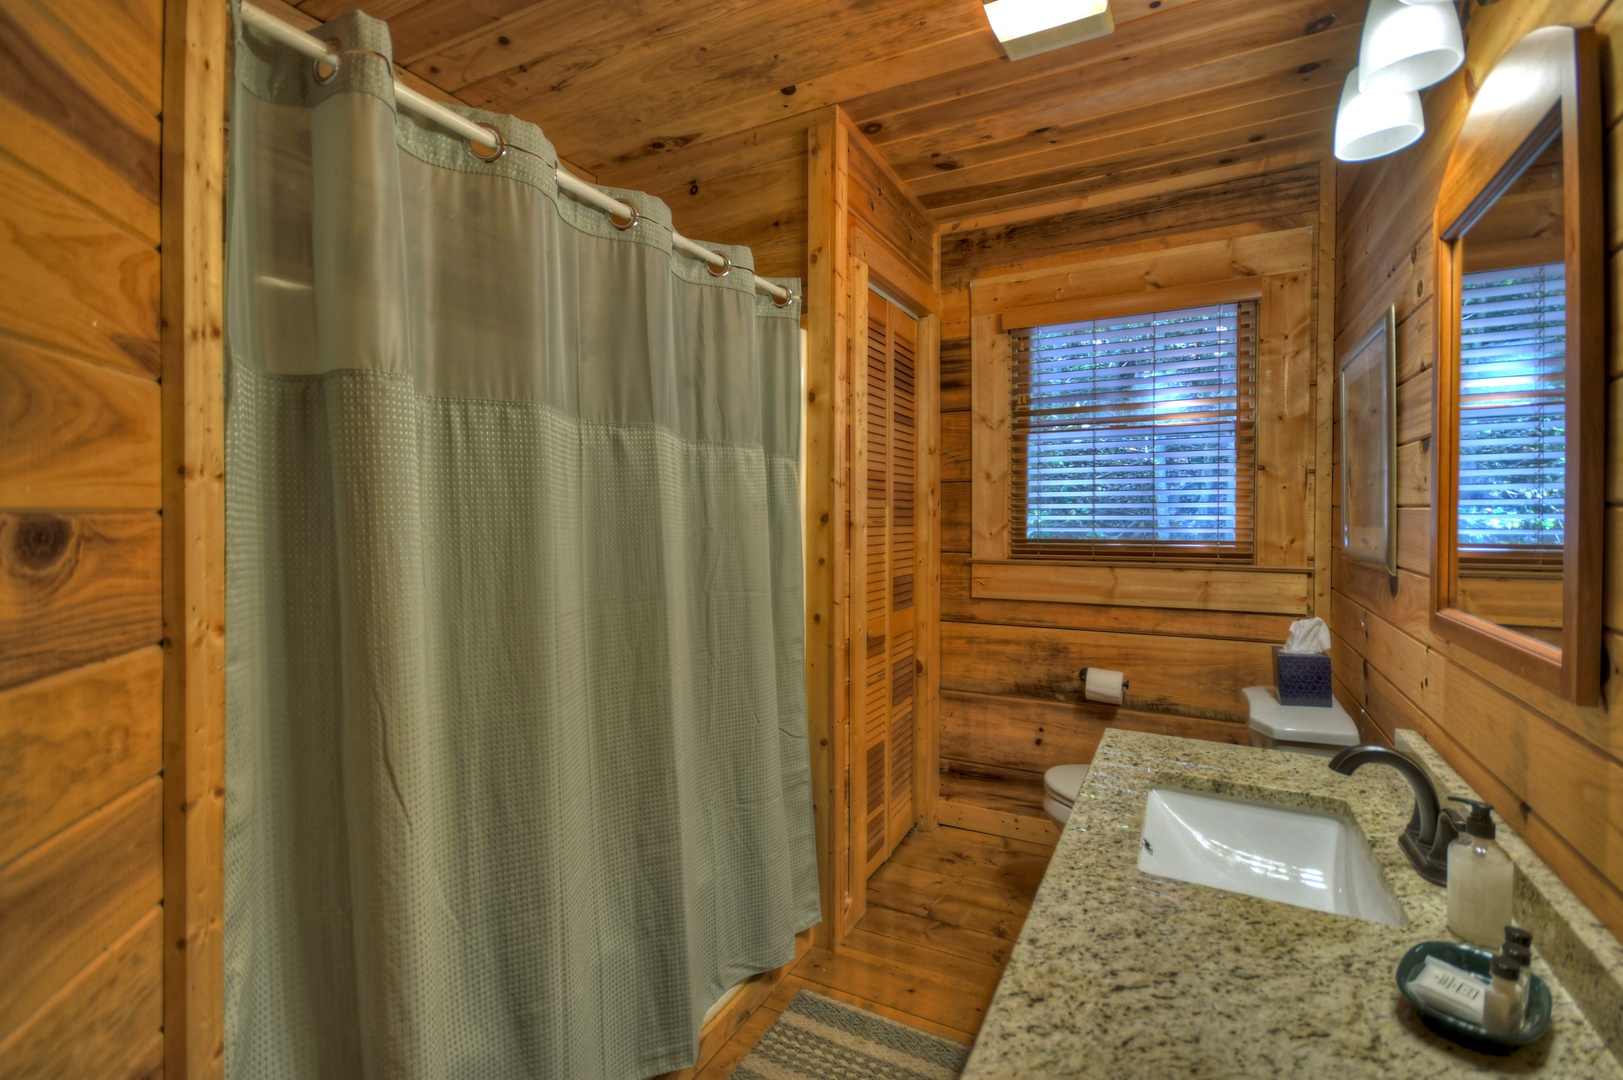 Ridgetop Pointaview- Entry level shared bathroom with a vanity sink, toilet and shower